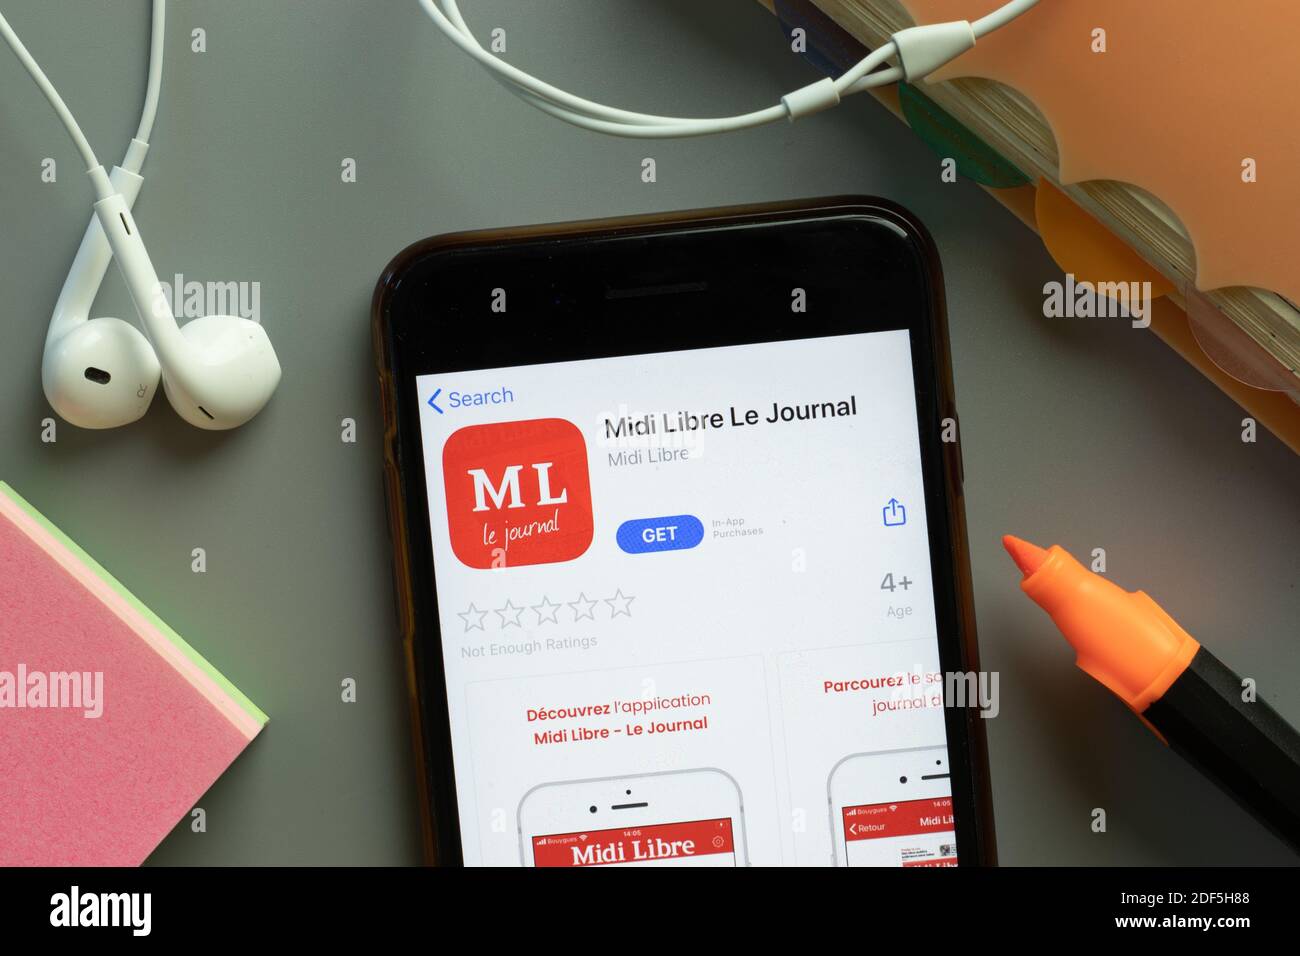 New York, USA - 1 December 2020: Midi Libre Le Journal mobile app icon on phone screen top view, Illustrative Editorial. Stock Photo